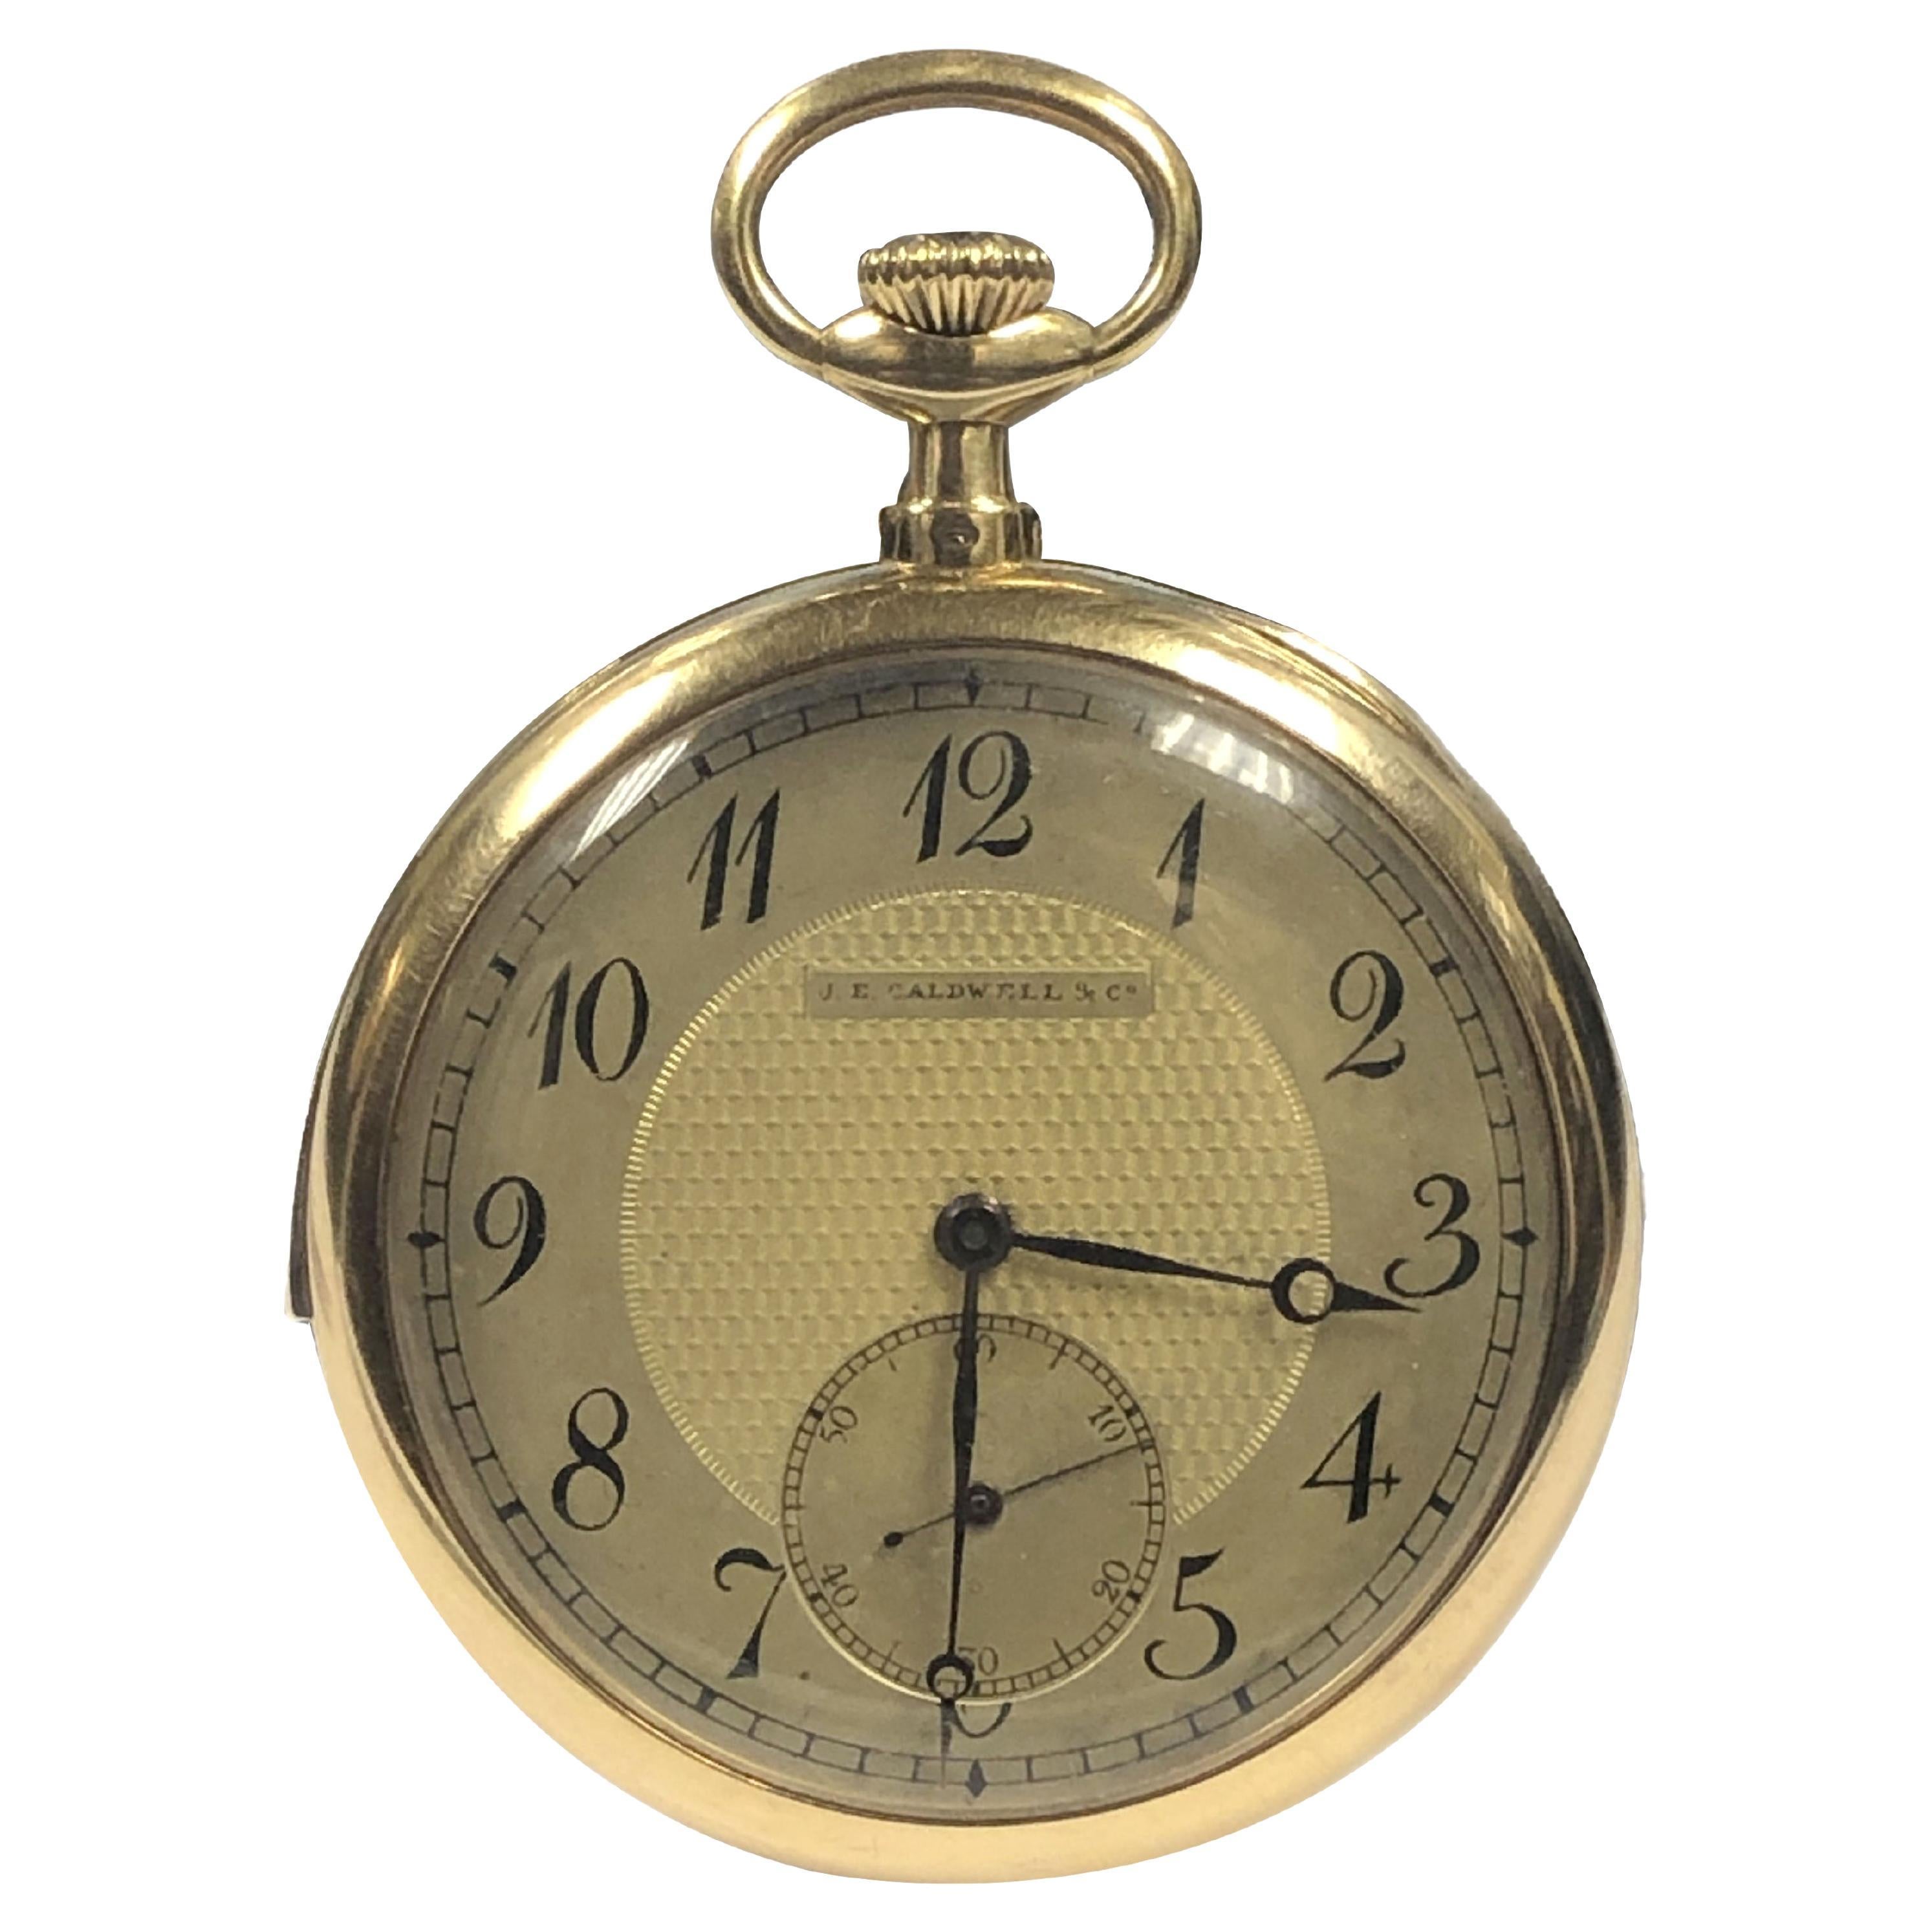 J.E. Caldwell High Grade Minute Repeater Gold Cased Pocket Watch